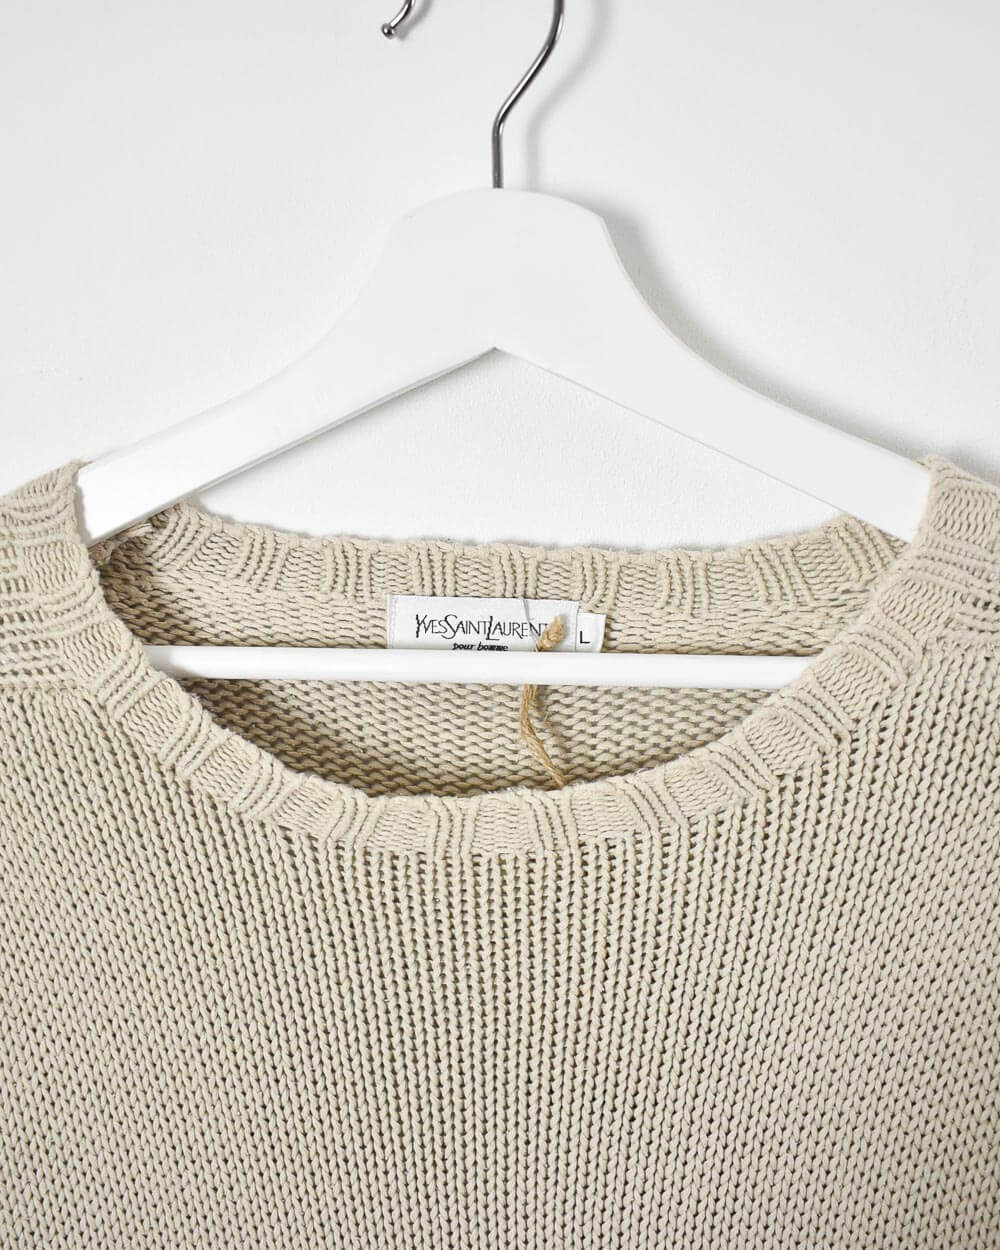 Yves Saint Laurent Knitted Sweatshirt - X-Large - Domno Vintage 90s, 80s, 00s Retro and Vintage Clothing 